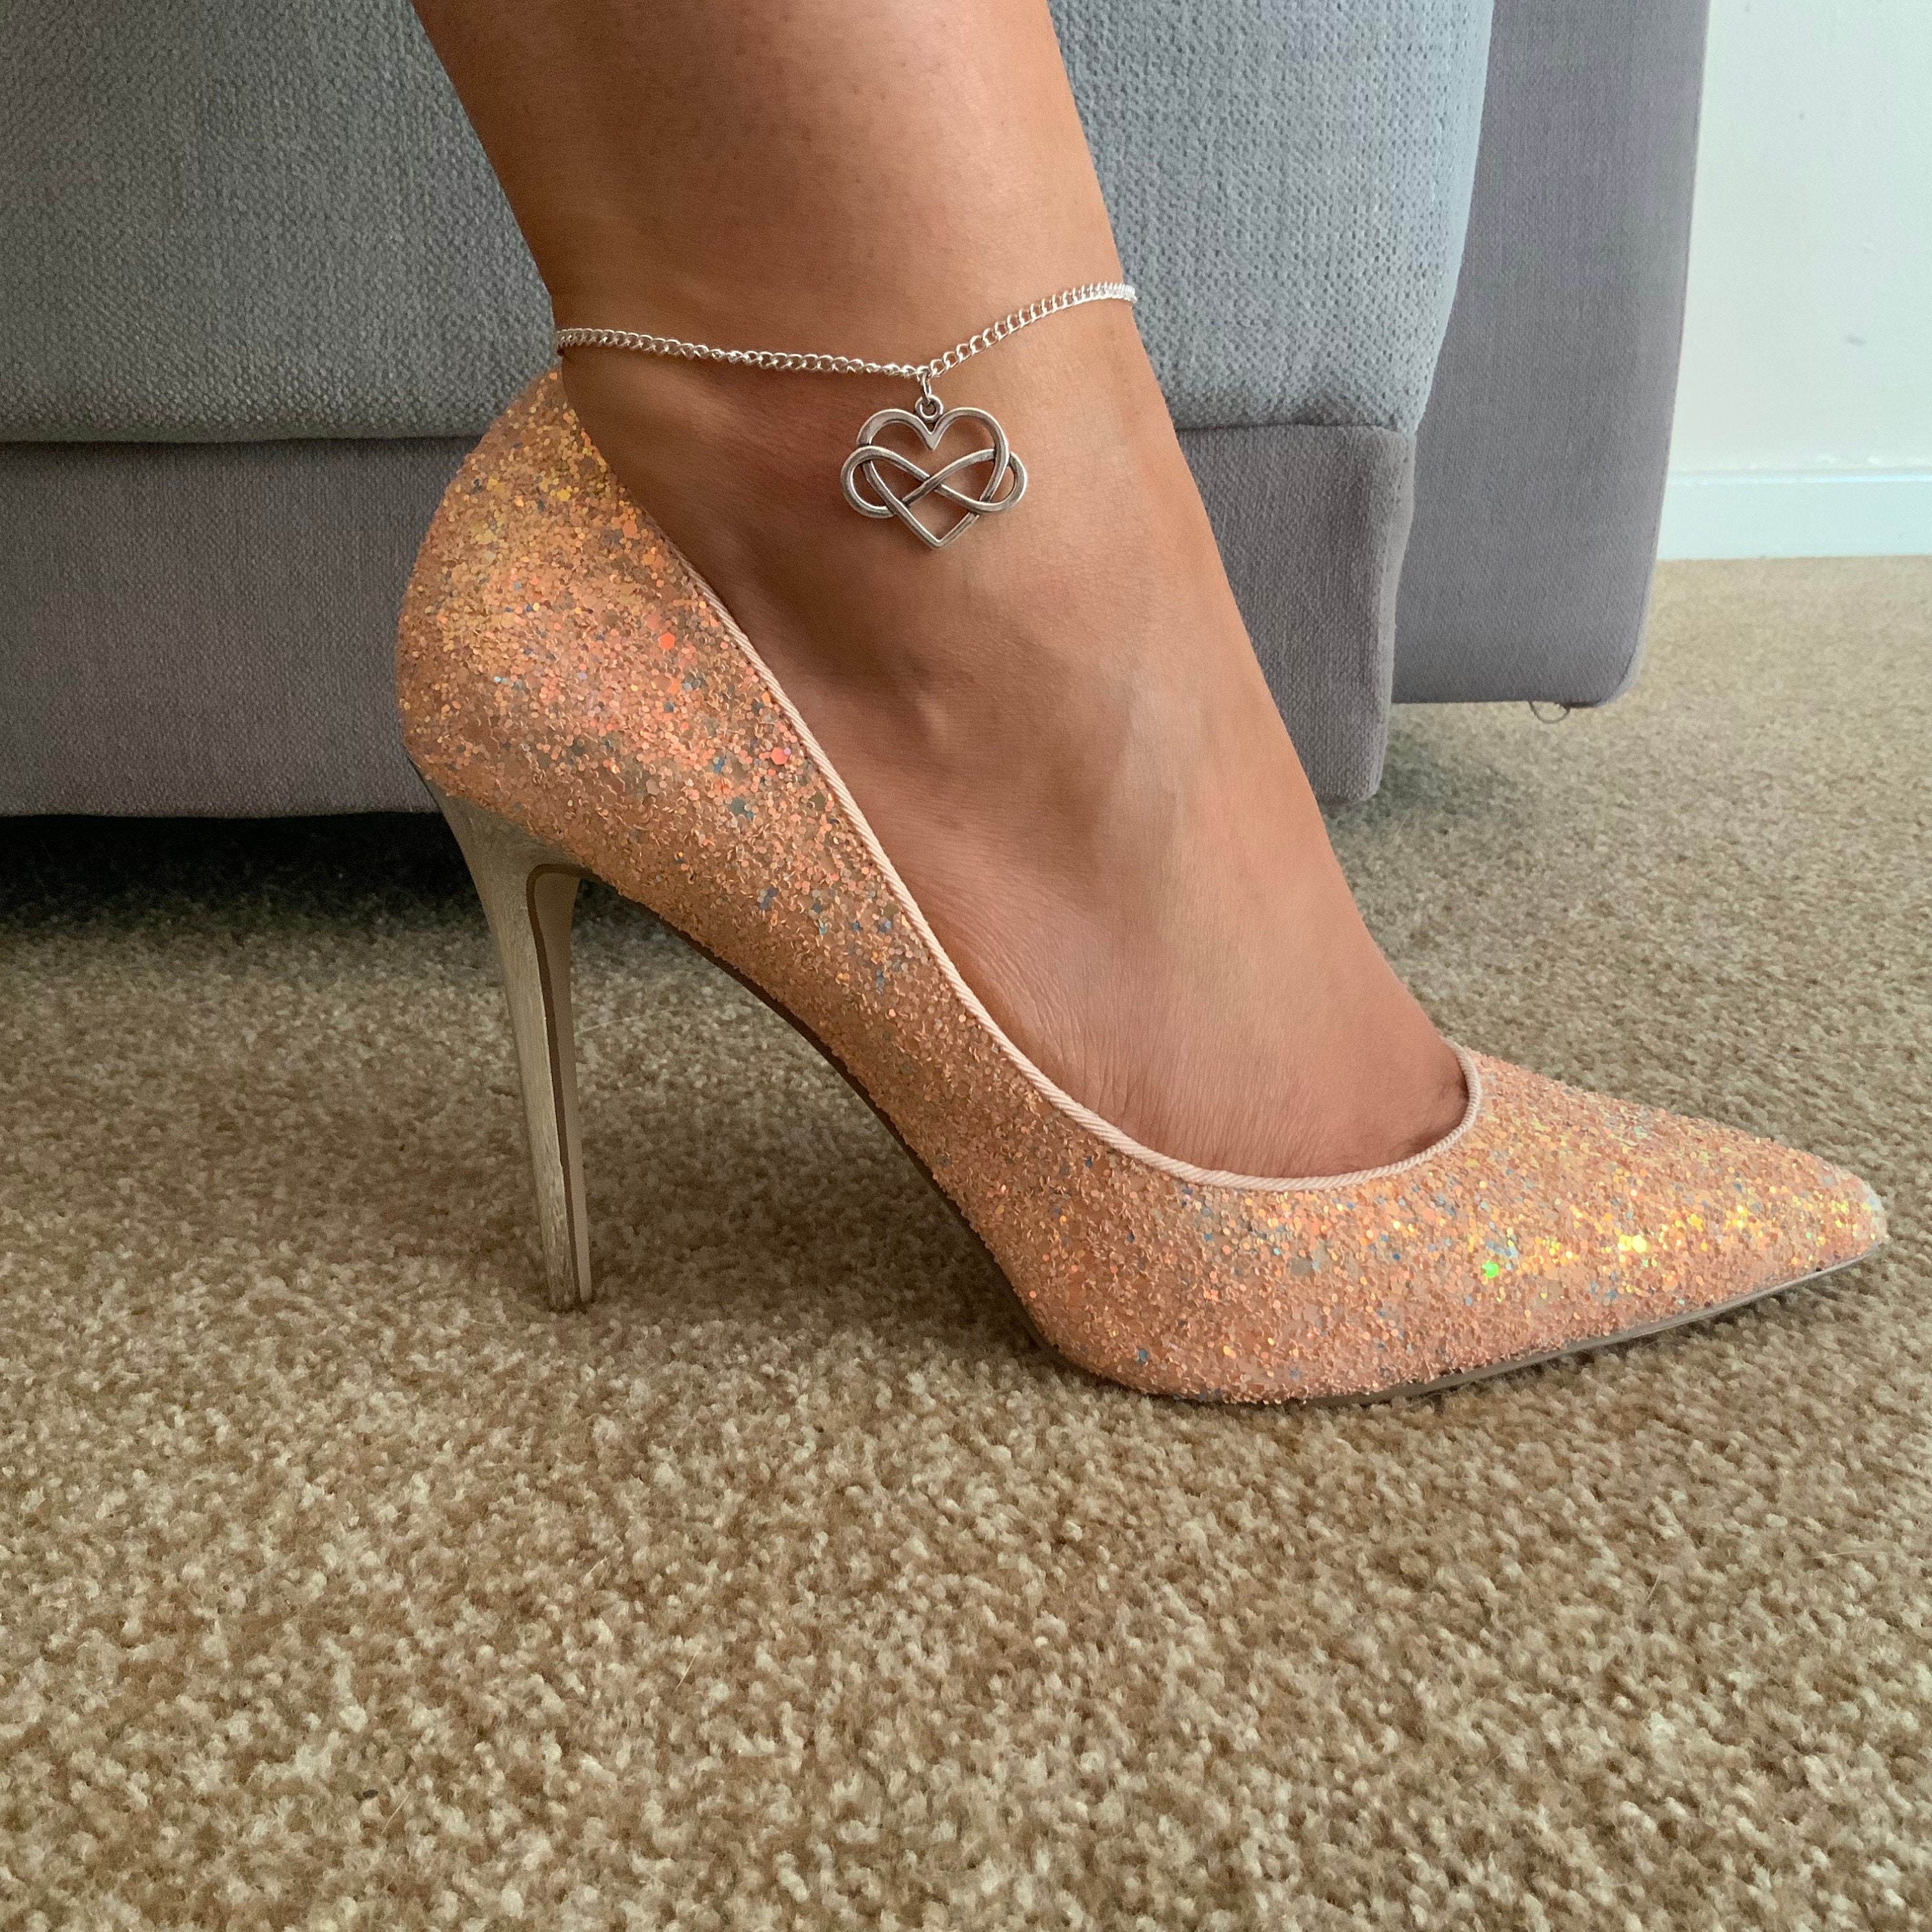 Polyamory Hotwife Anklet Hot Wife Cuckold Anklet Swinger Etsy Canada